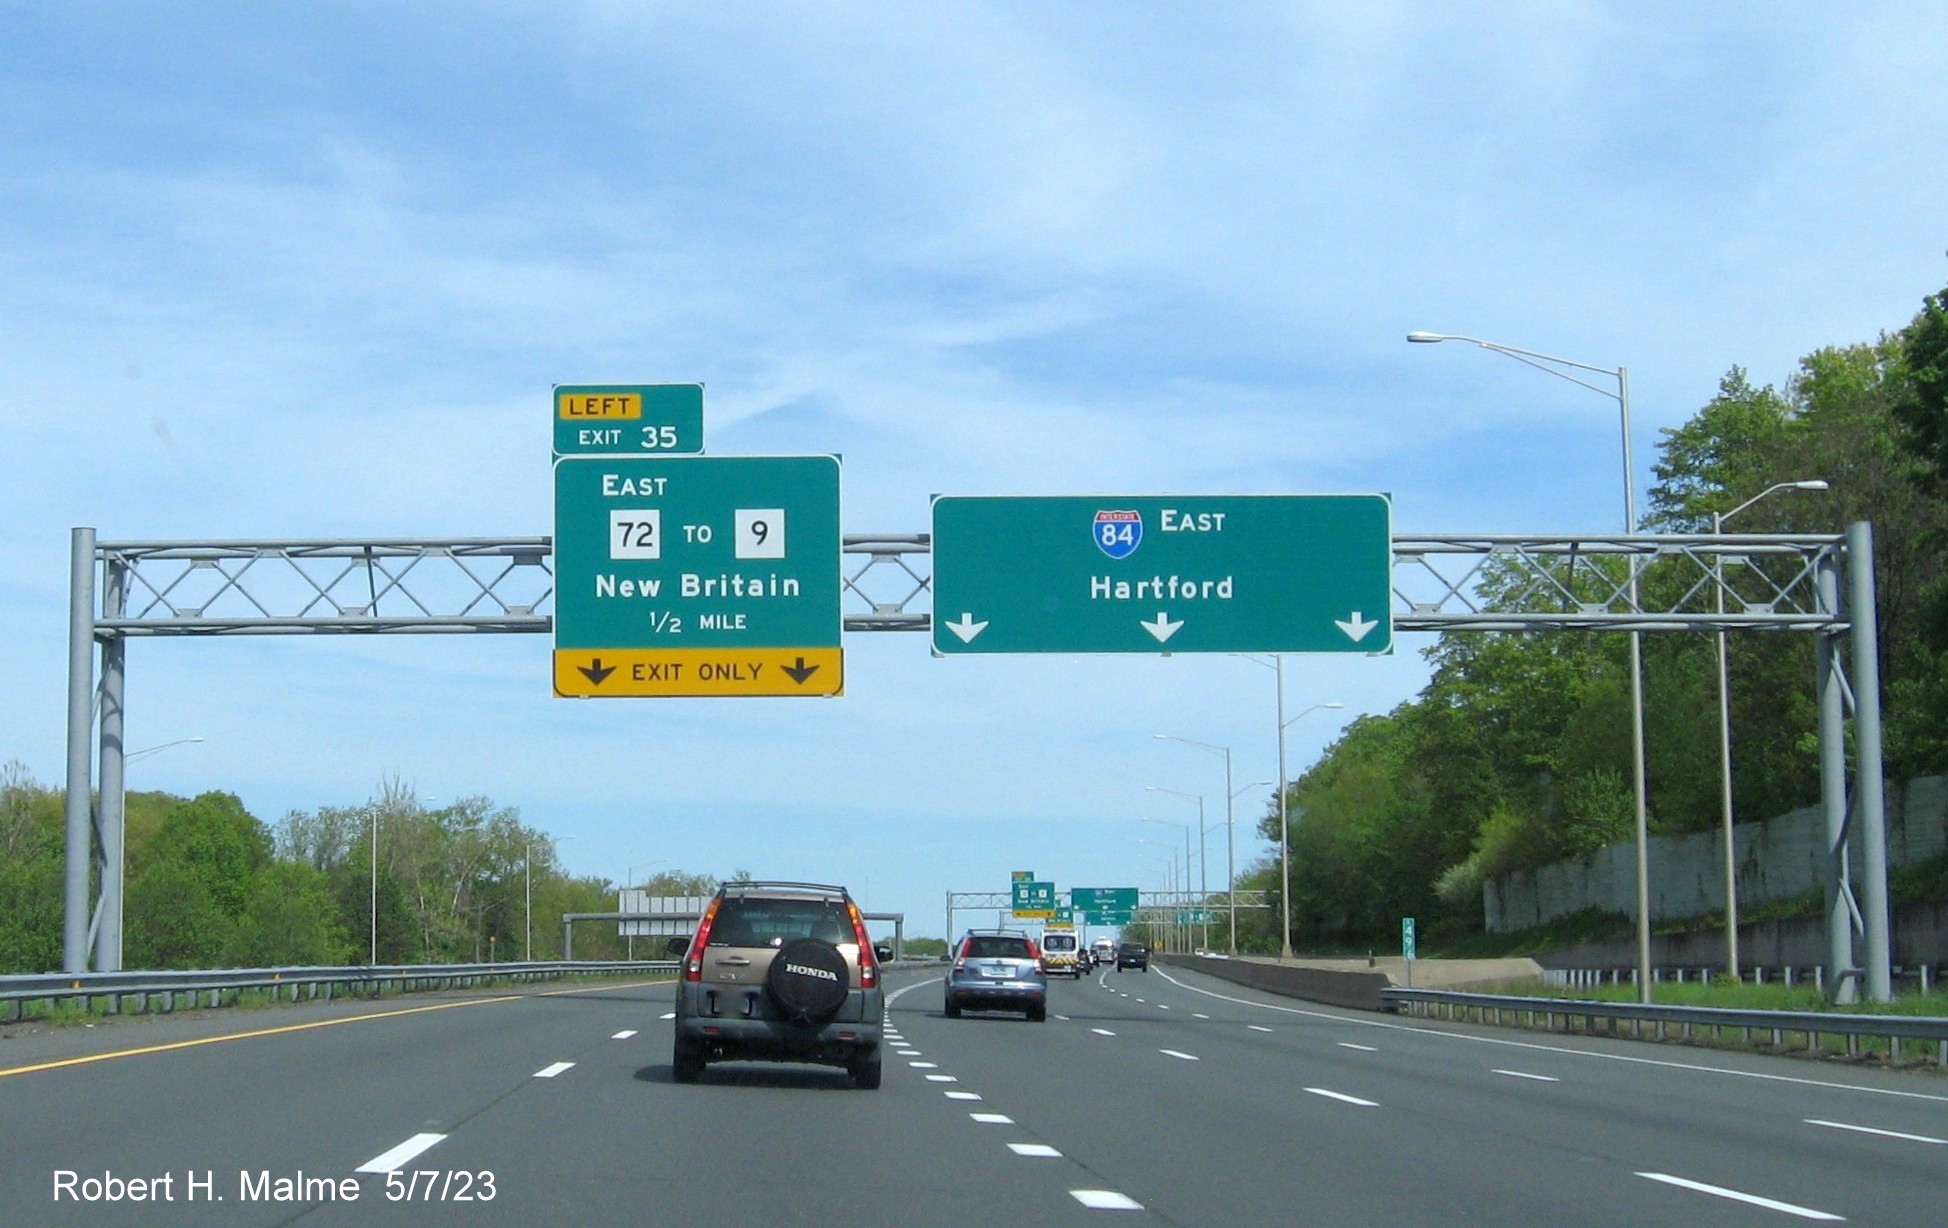 Image of 1/2 mile advance sign for CT 72 East exit on I-84 East in Bristol, May 2023